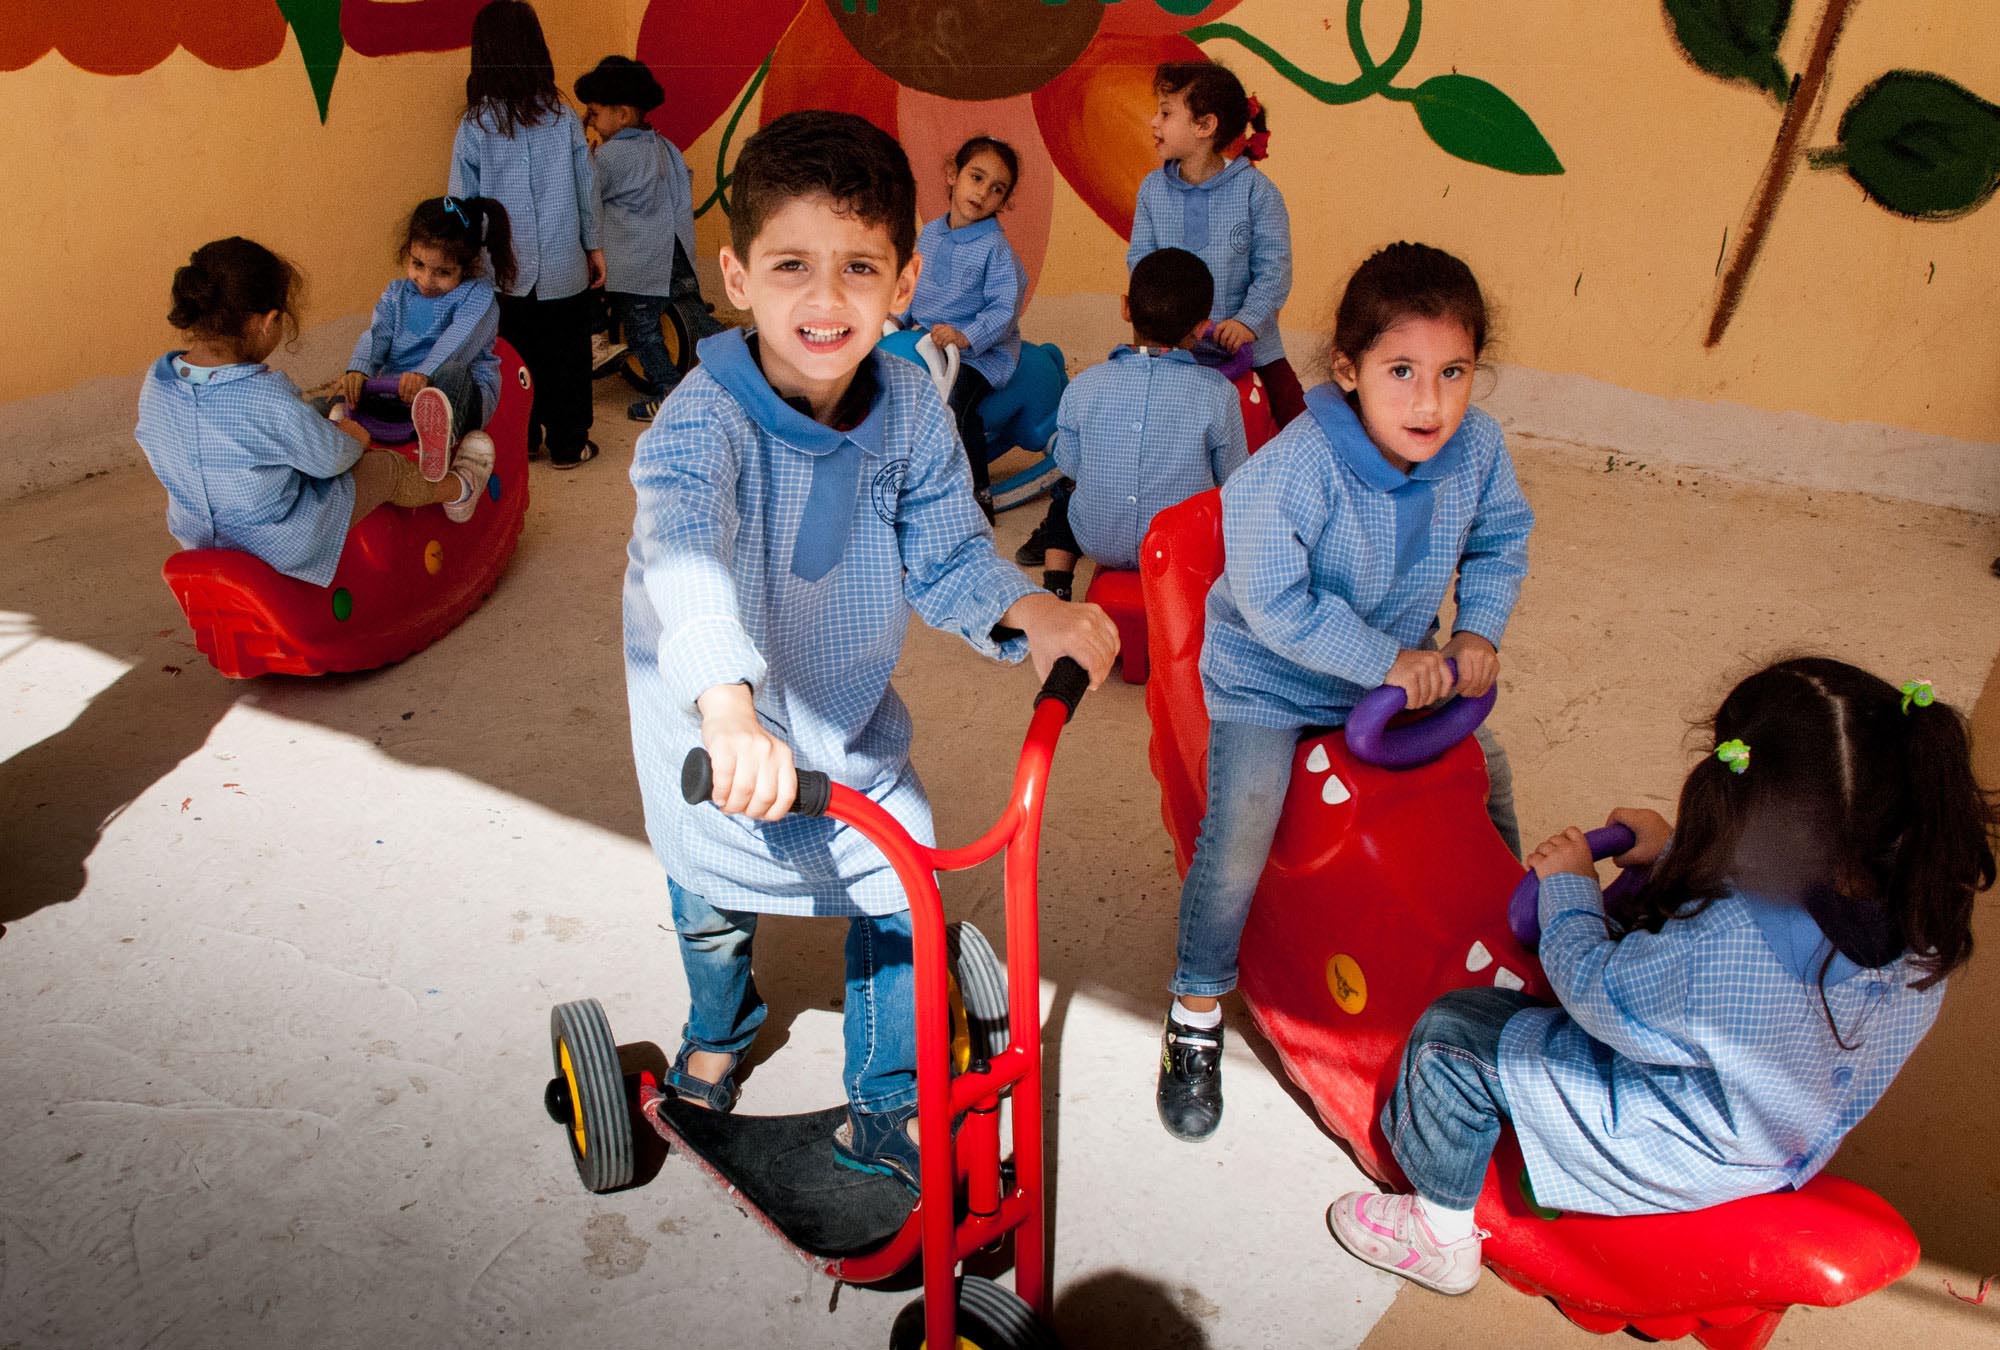 Preschoolers in Shatila Palestinian camp have fun, new equipment in their playground, thanks to Anera's renovations.